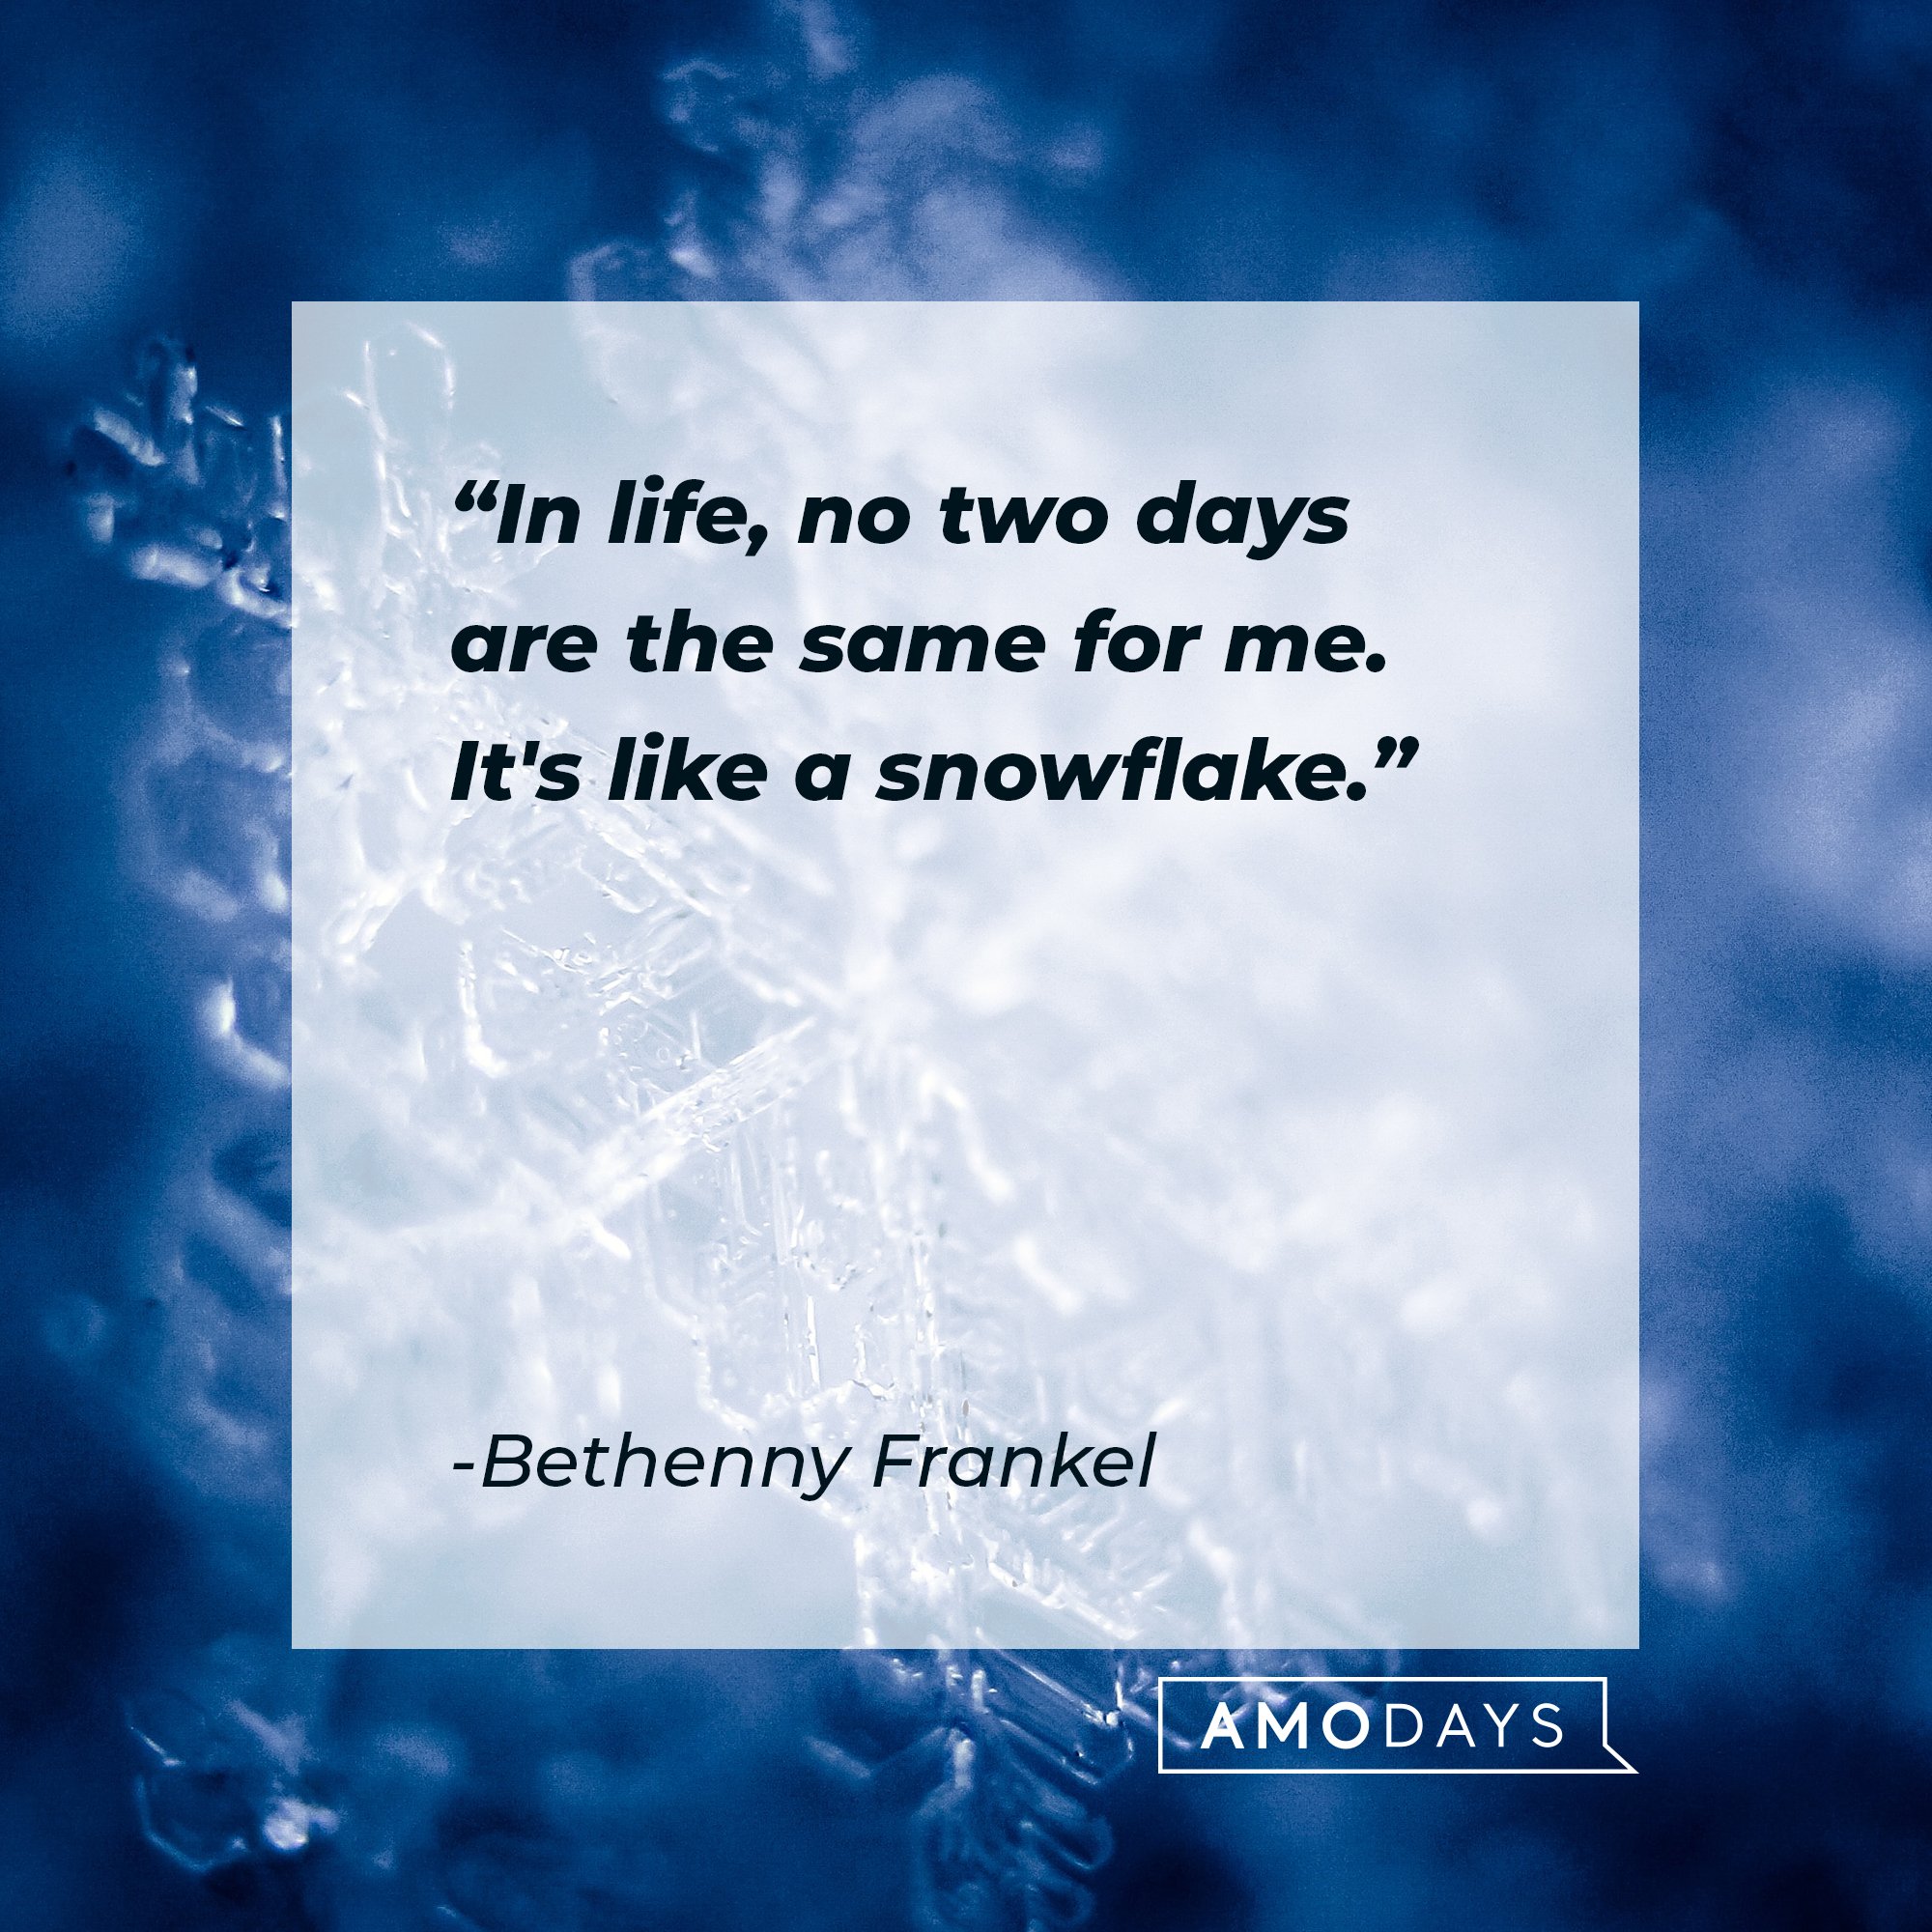 Bethenny Frankel’s quote: "In life, no two days are the same for me. It's like a snowflake." | Image: AmoDays